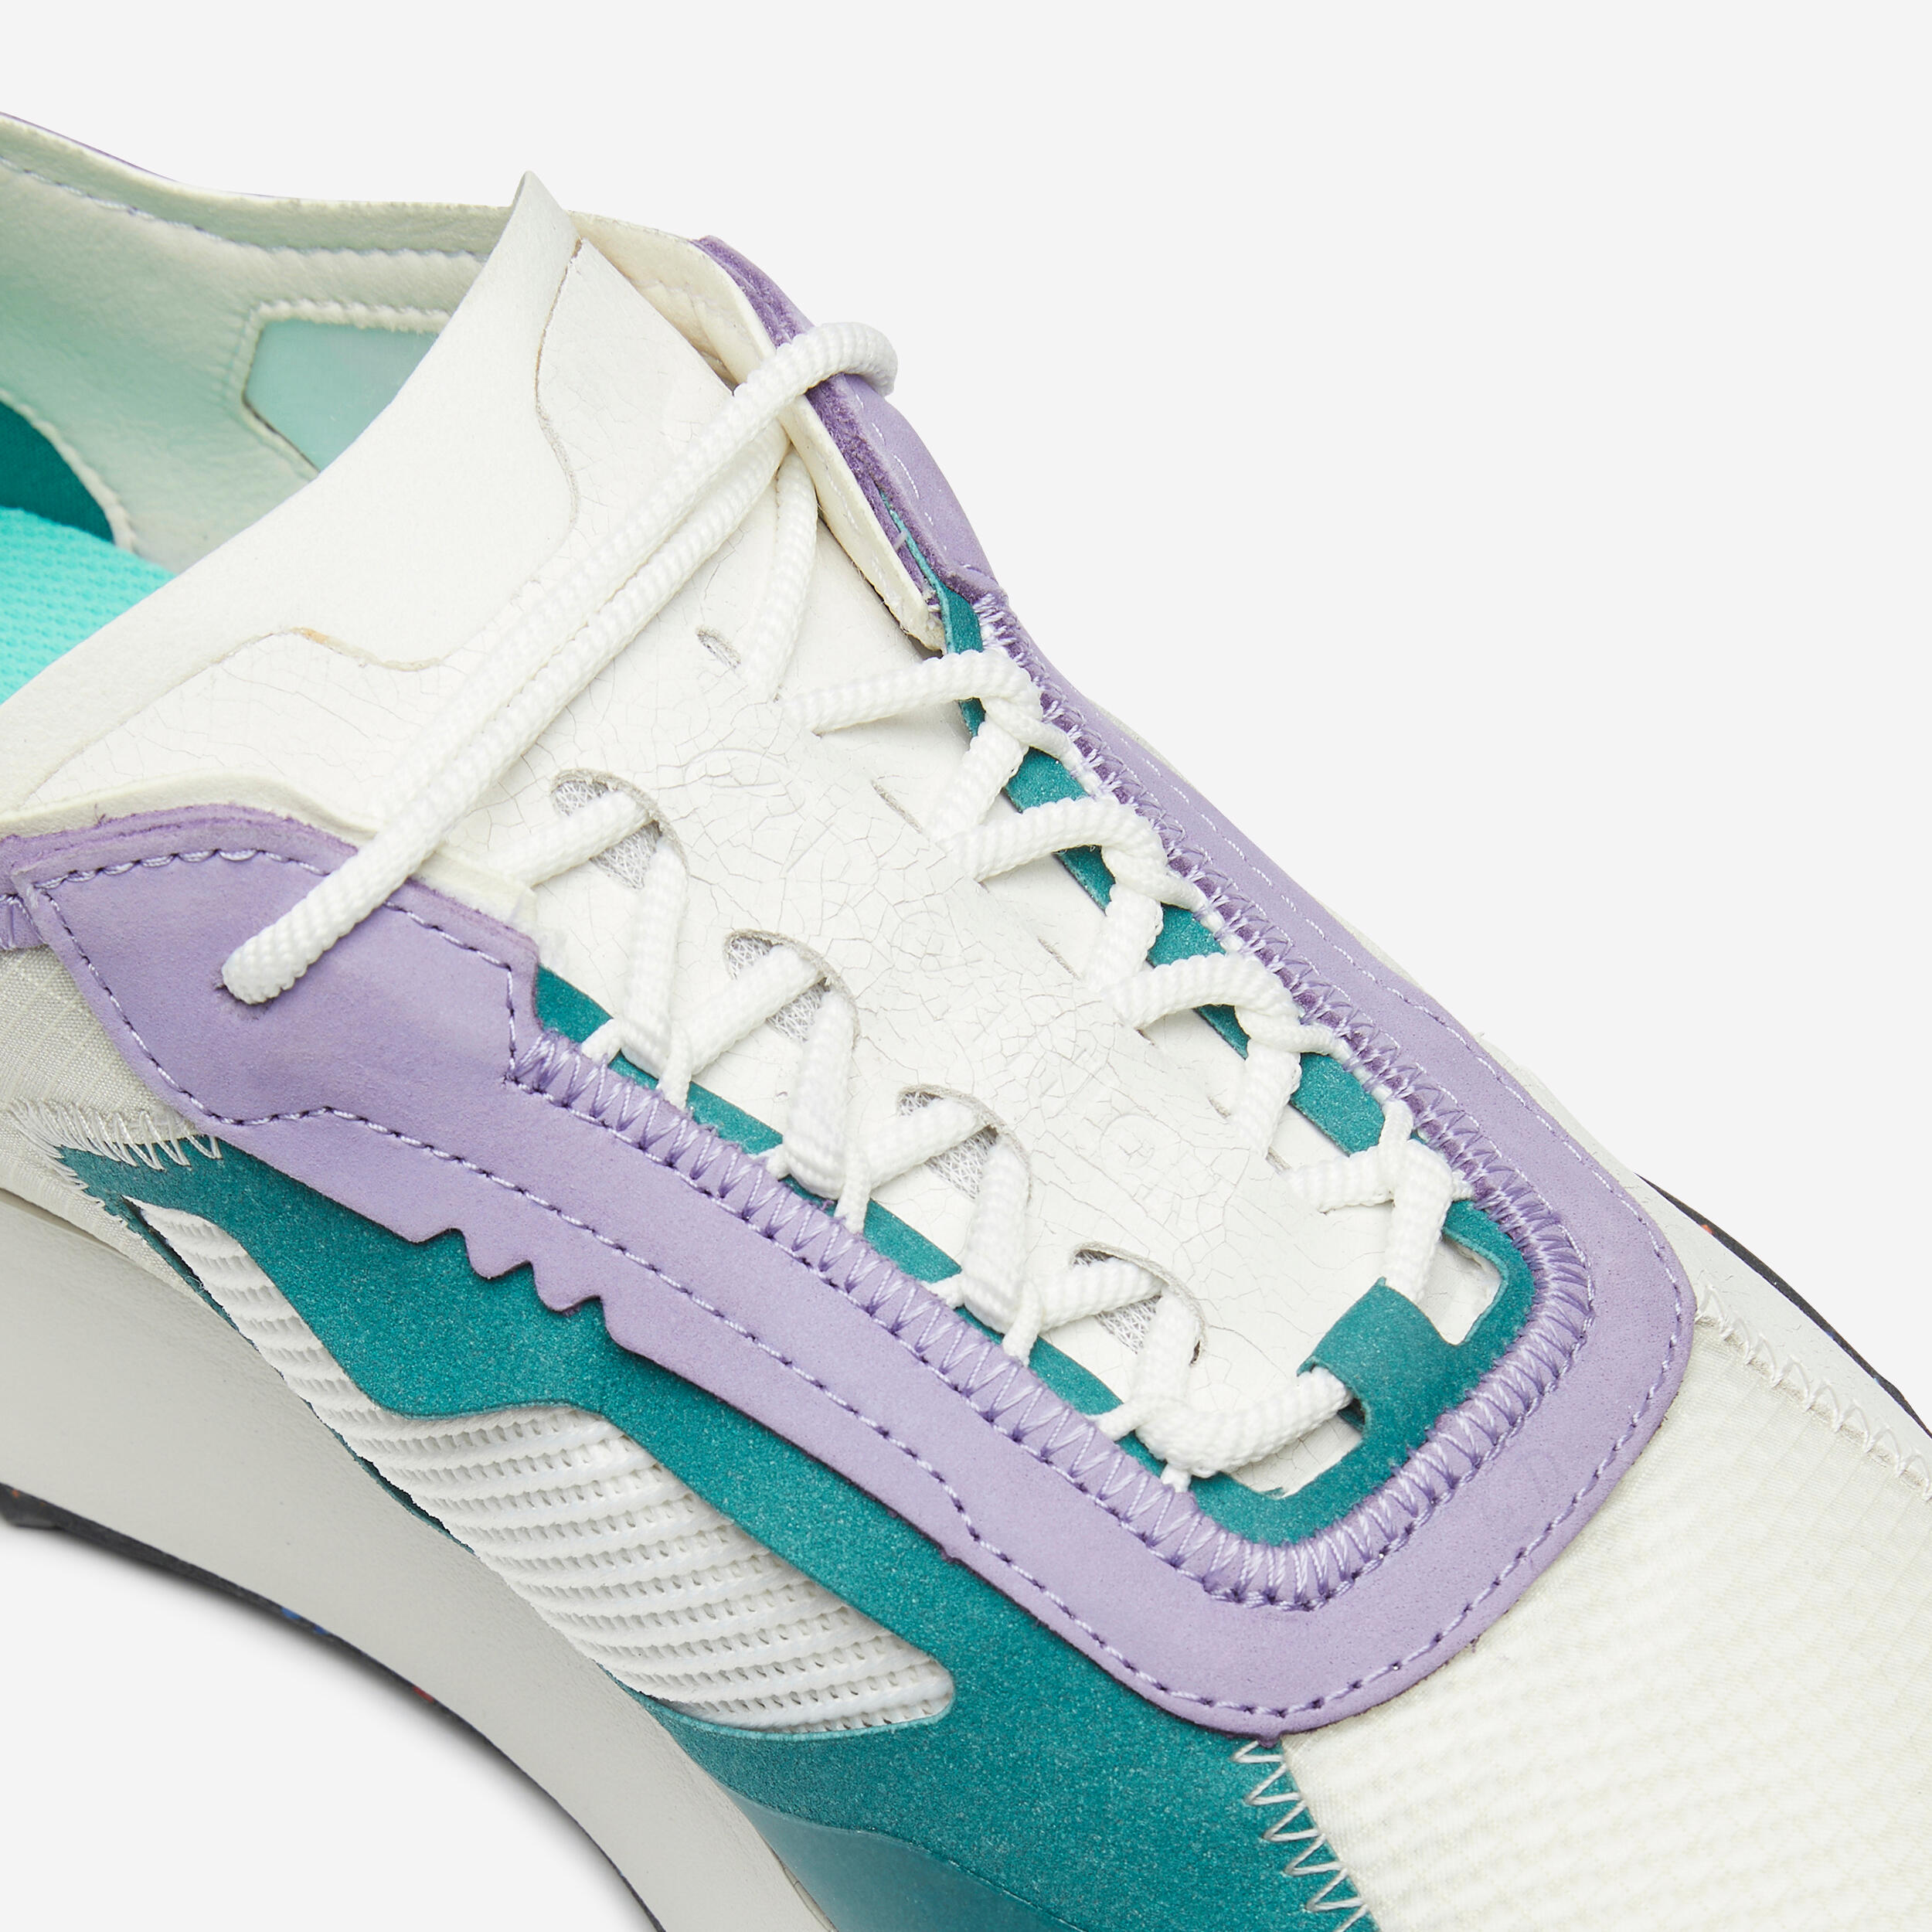 WLKR 76 Trainers-White and Purple 9/12